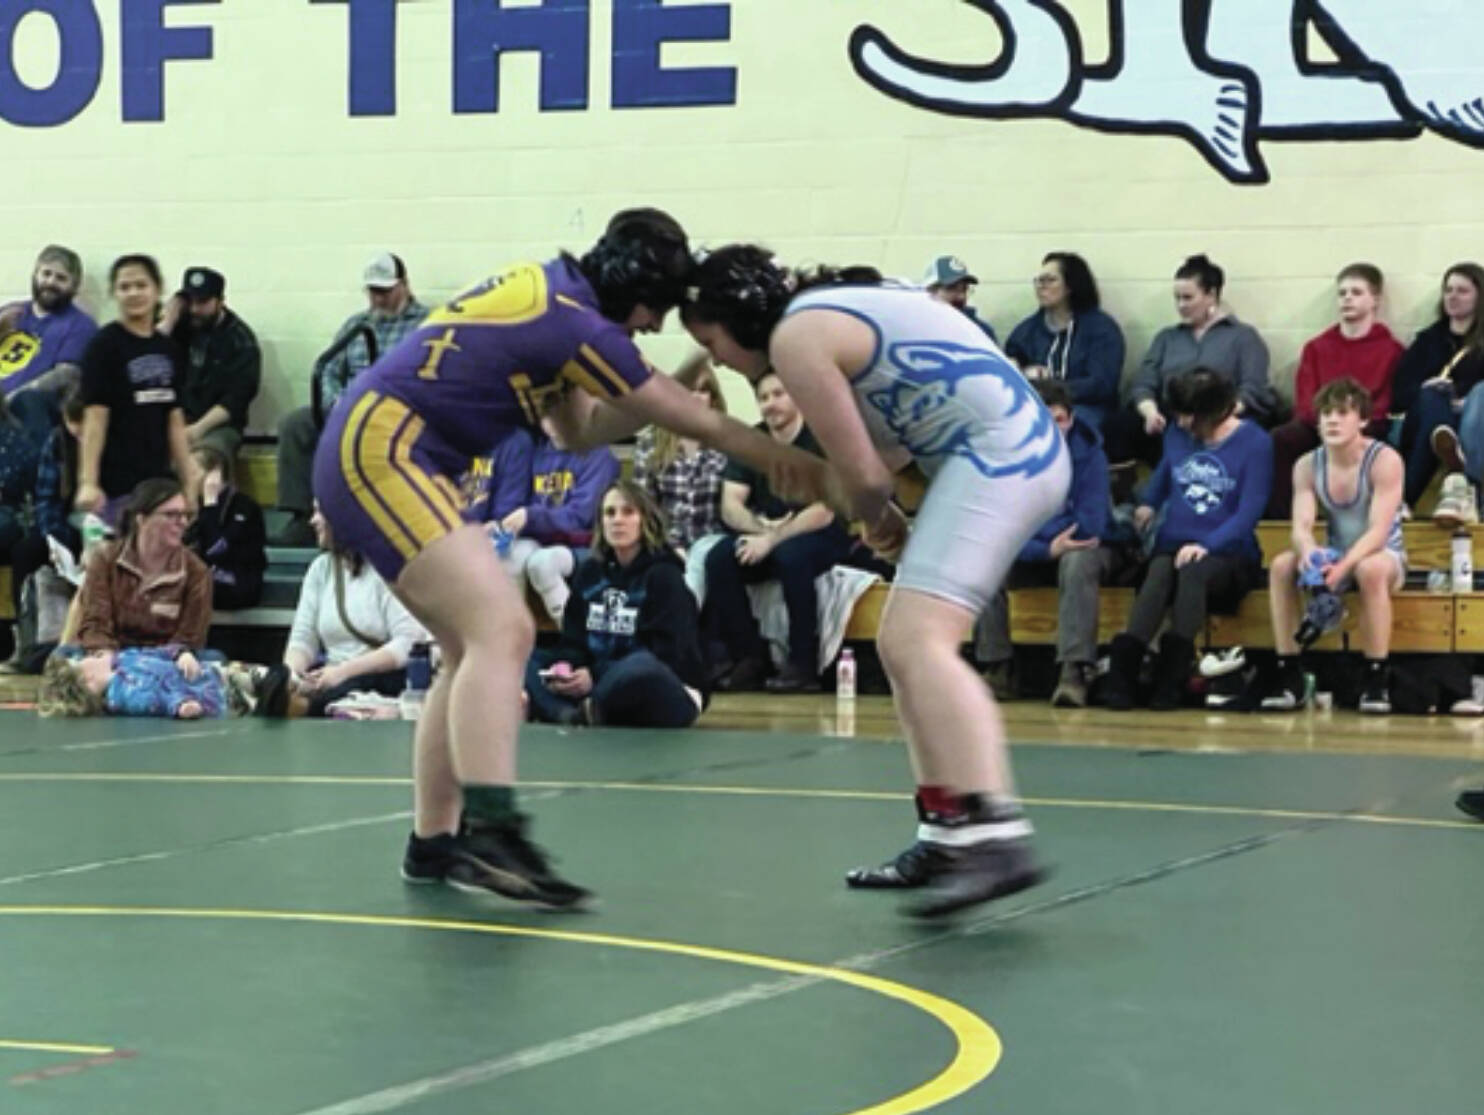 Photo provided by Tela Bacher
Homer Middle School’s Flora Fitzpatrick competes with a Kenai student at the borough wrestling tournament in Seward last weekend.